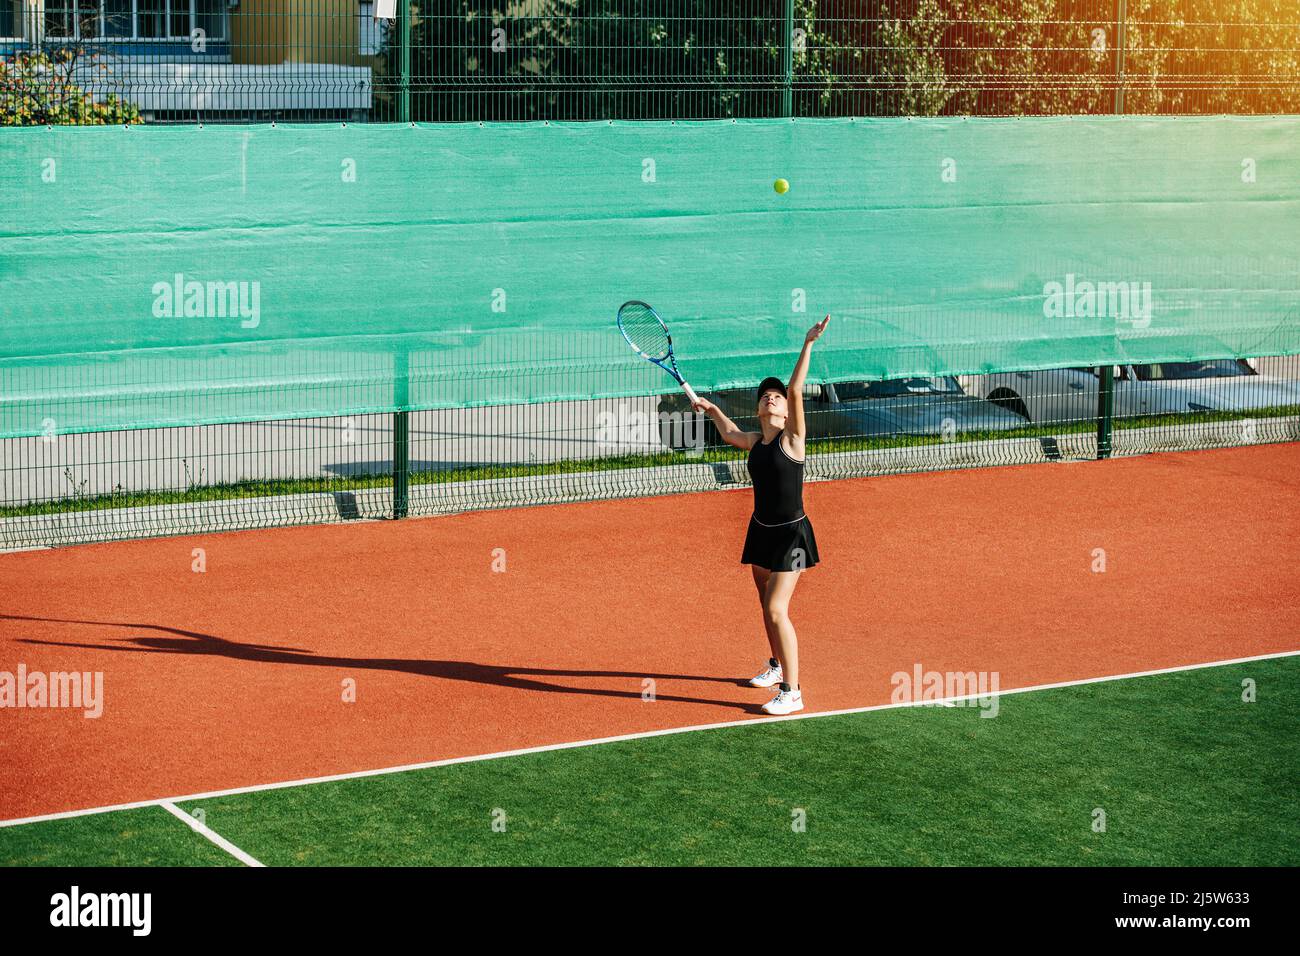 Long shot of a teenage girl practicing serve on a brand new outdoor tennis court. Vibrant green and brown with clear white lines. Stock Photo